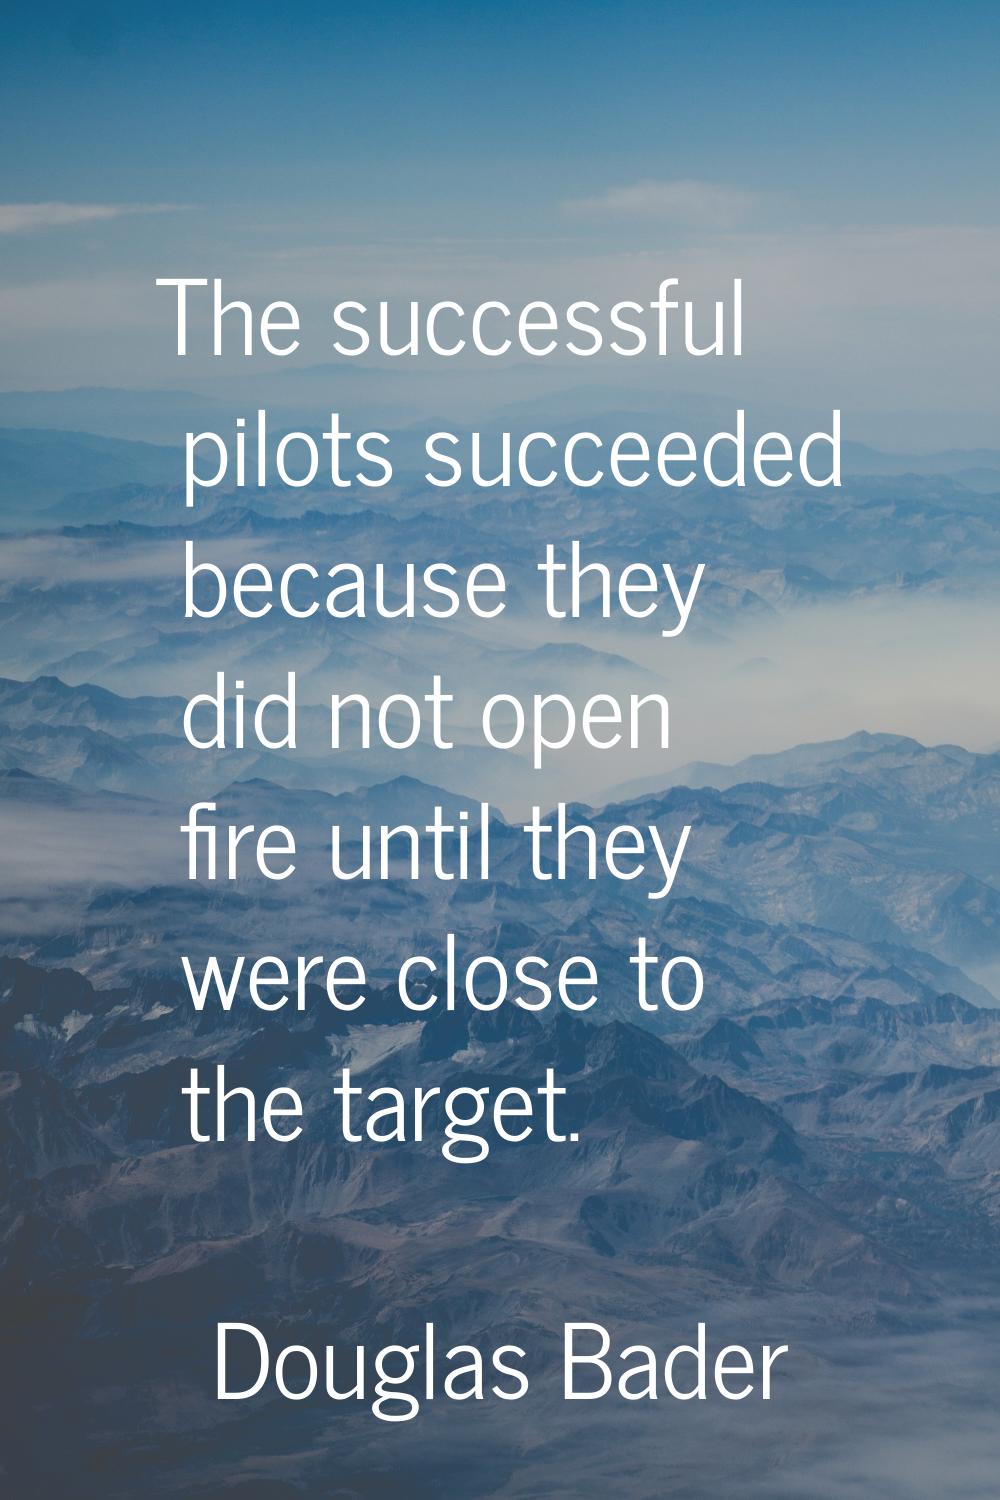 The successful pilots succeeded because they did not open fire until they were close to the target.